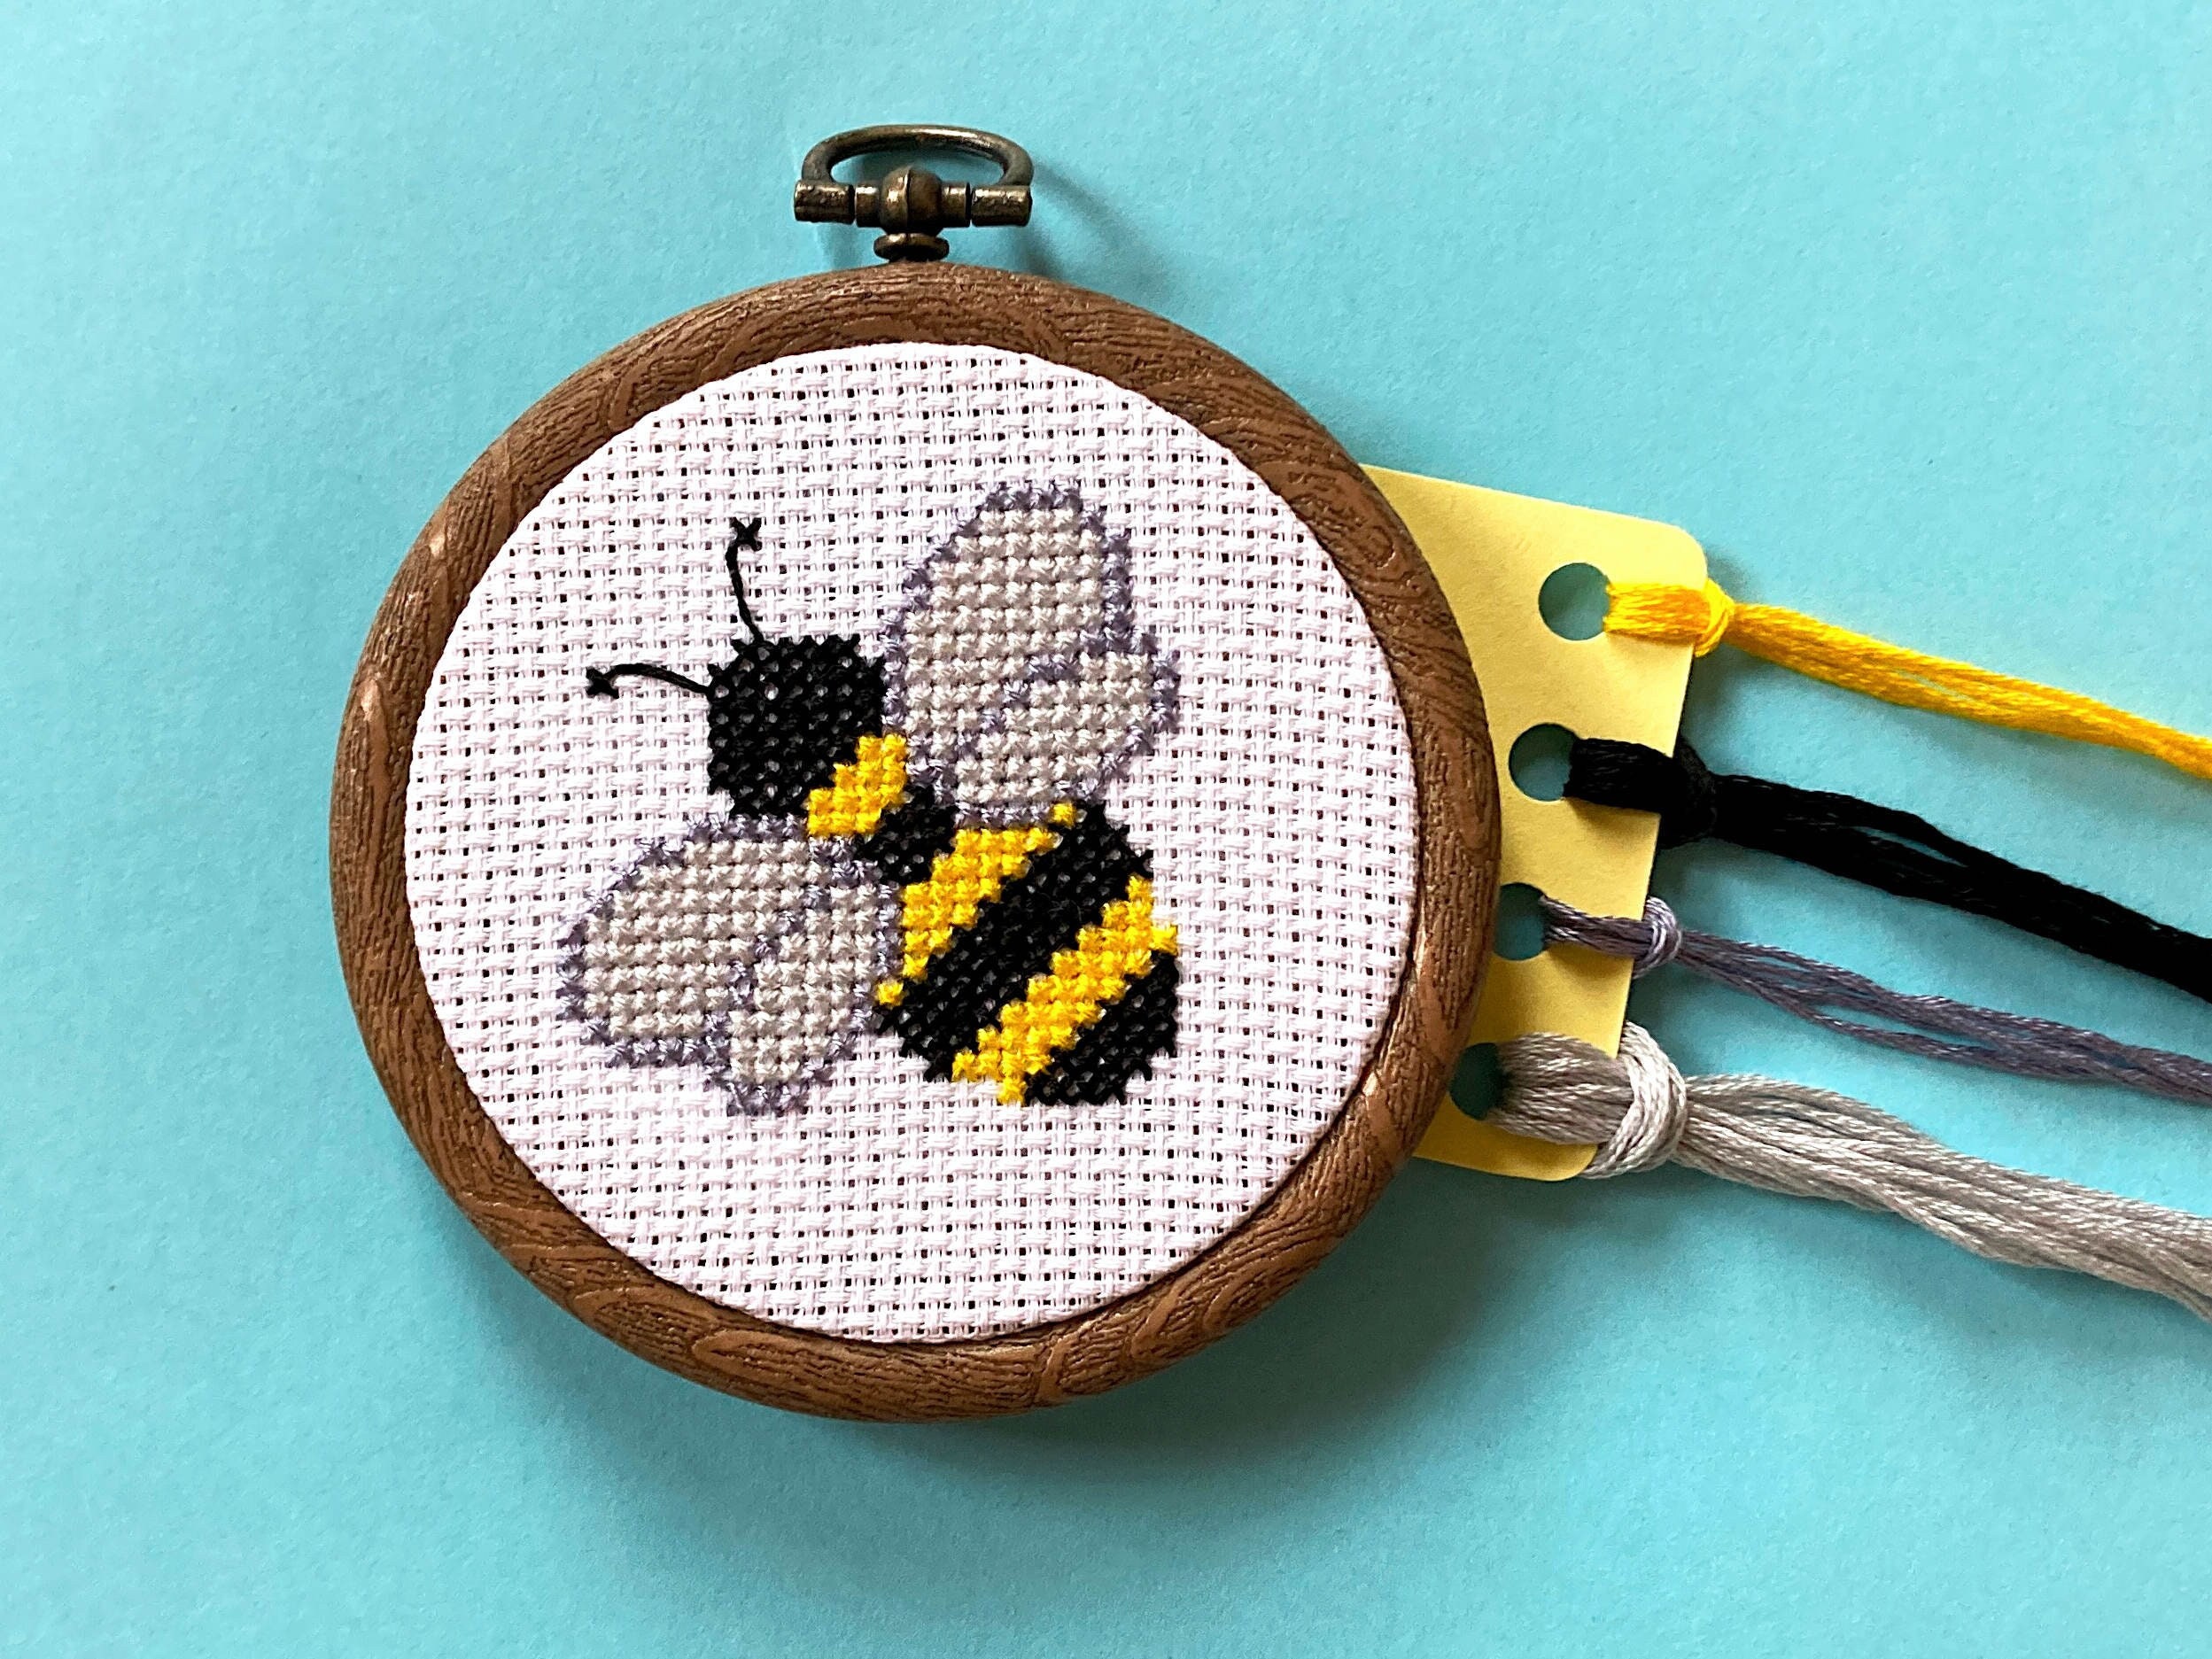 Beginner Embroidery Kit: Vintage Bee Easy DIY Embroidery Craft Kit for  Adults 